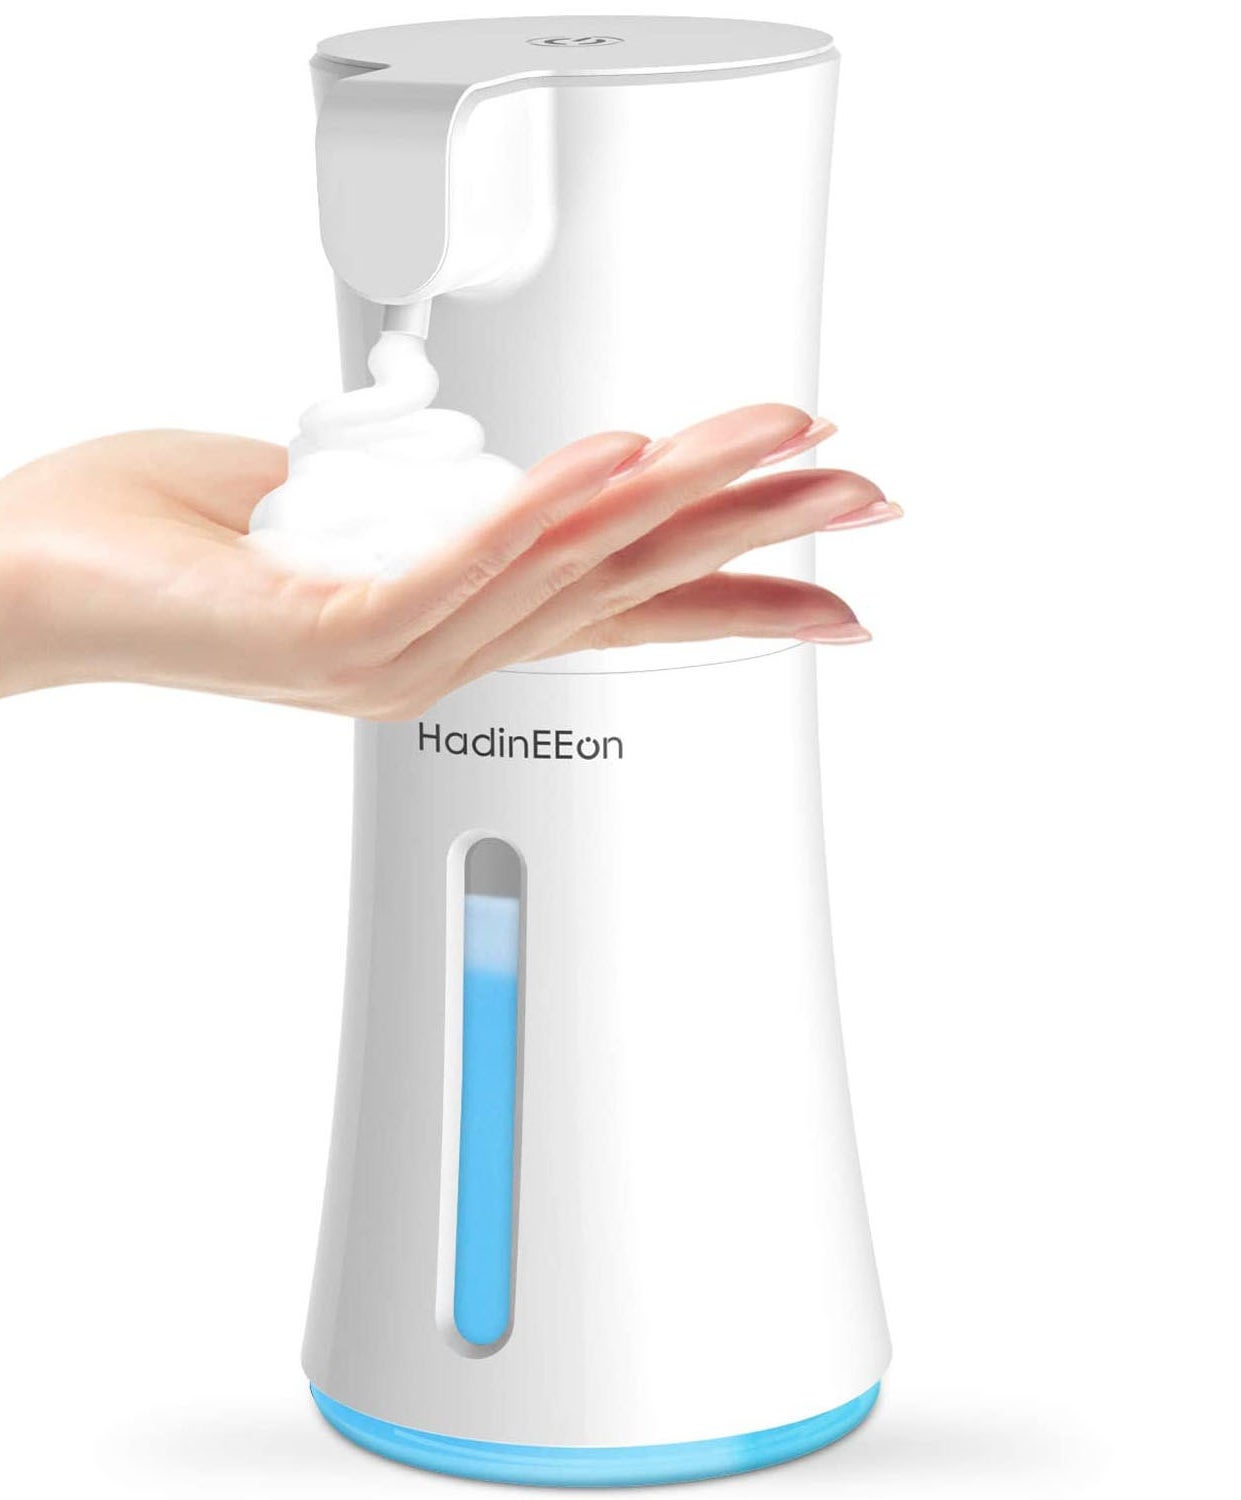 the Hadin EE on automatic foaming soap dispenser